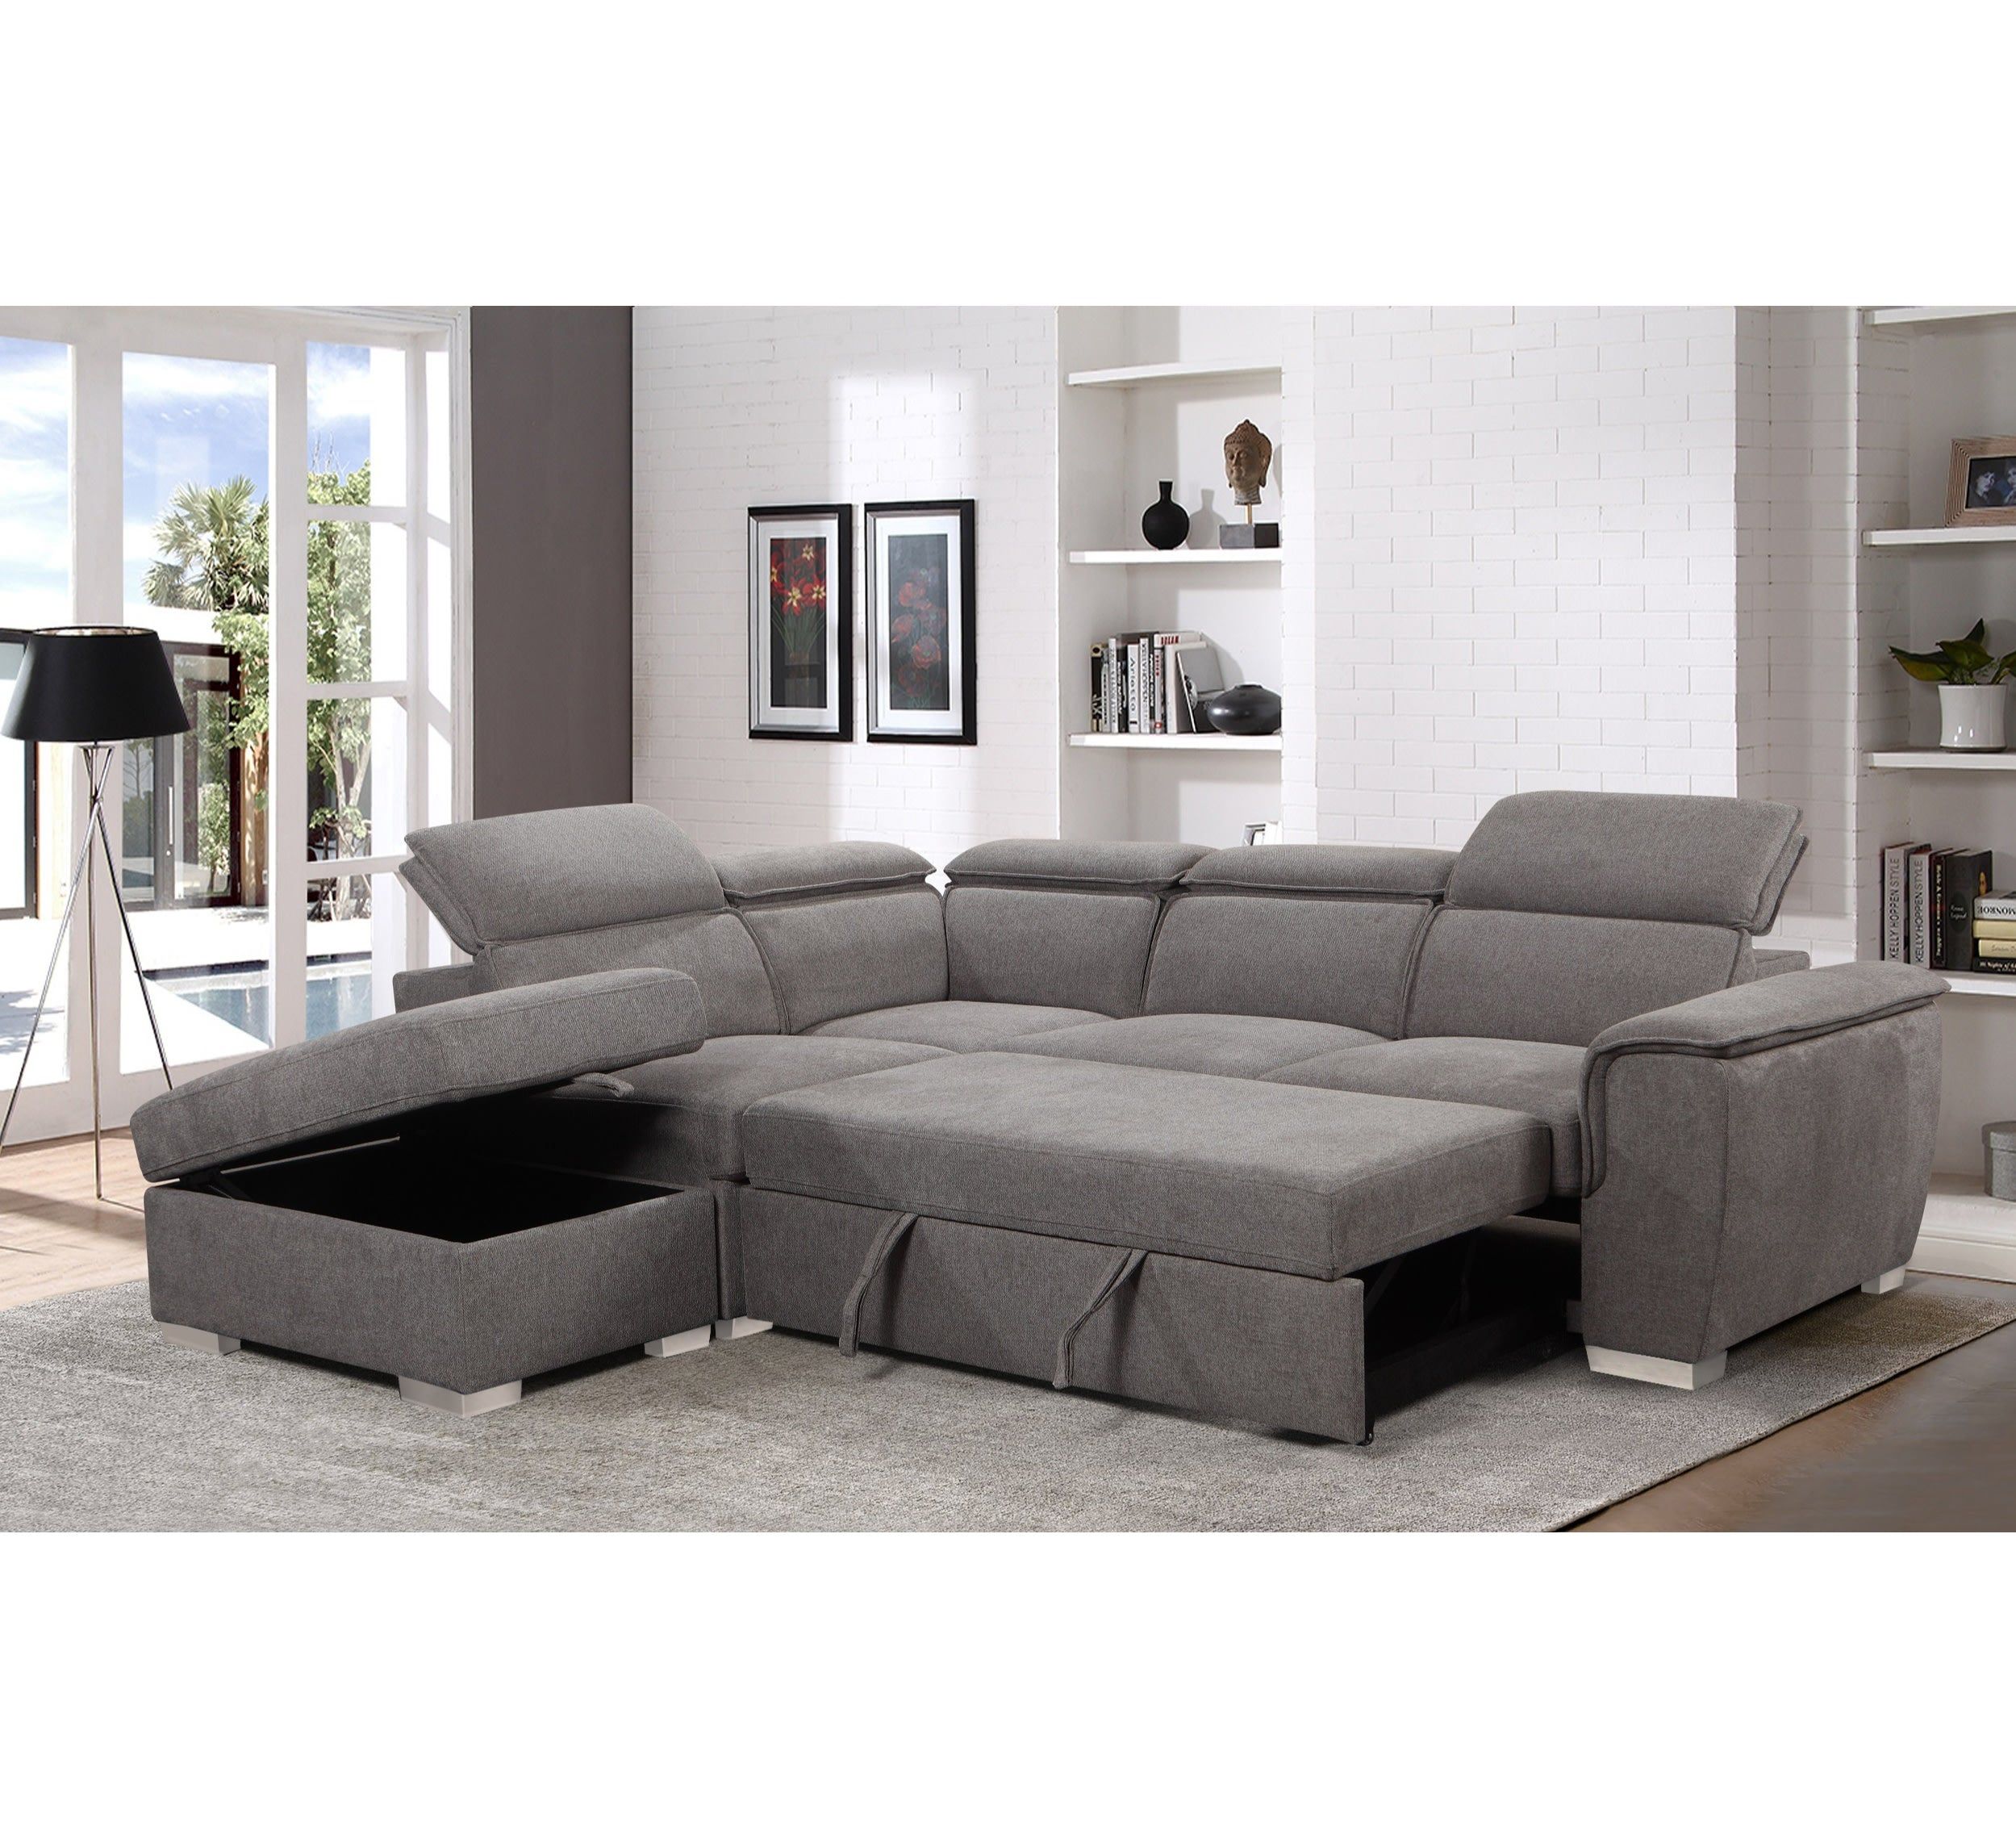 Maximize Your Space with a Corner Sofa Bed With Storage